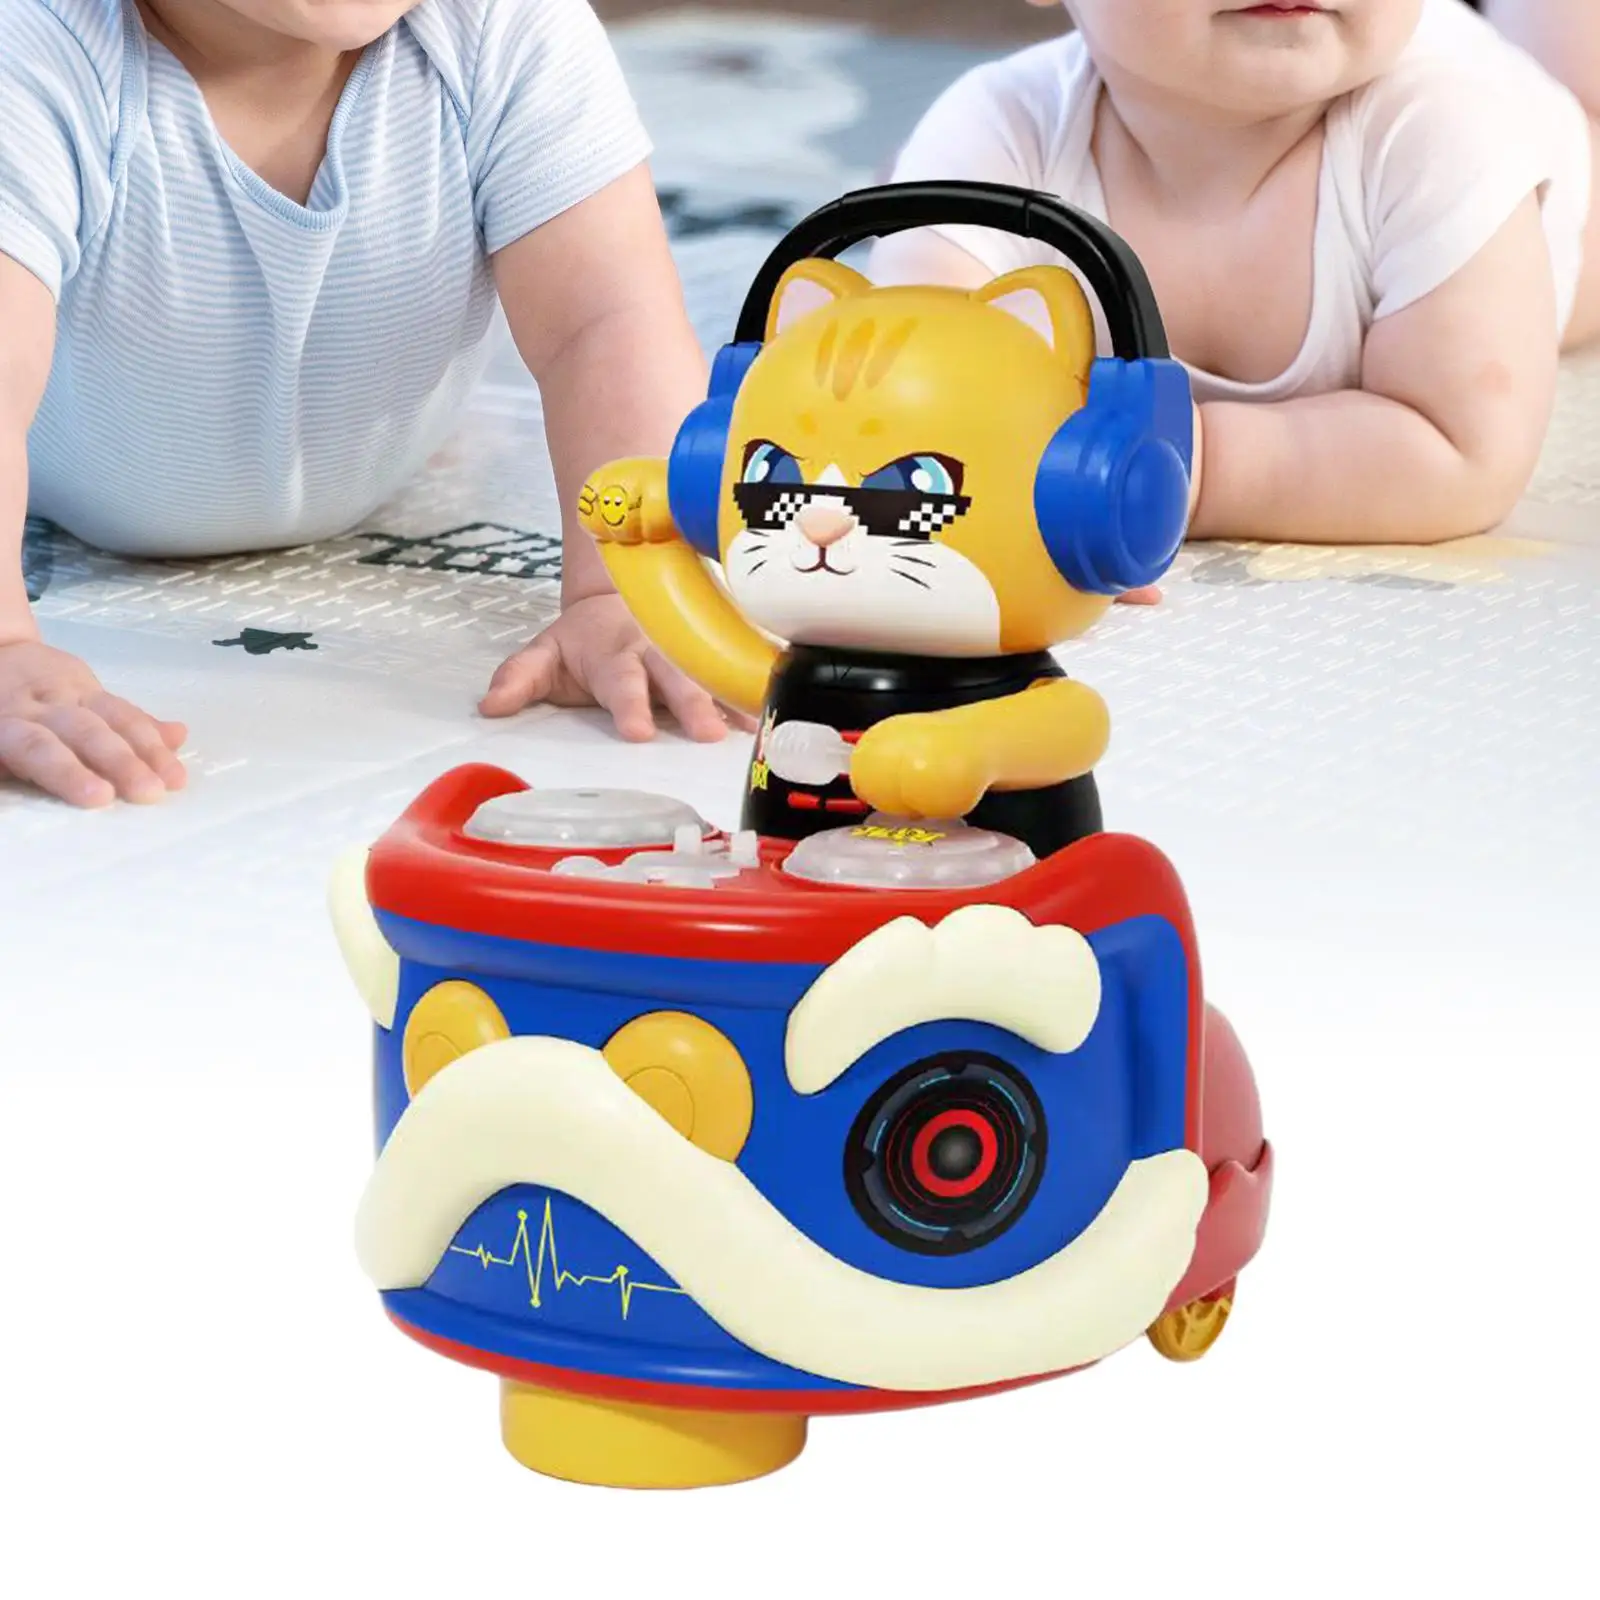 Dancing Cat Electronic Pet Robot Interaction Toy Baby Toy Sensory for - £14.19 GBP